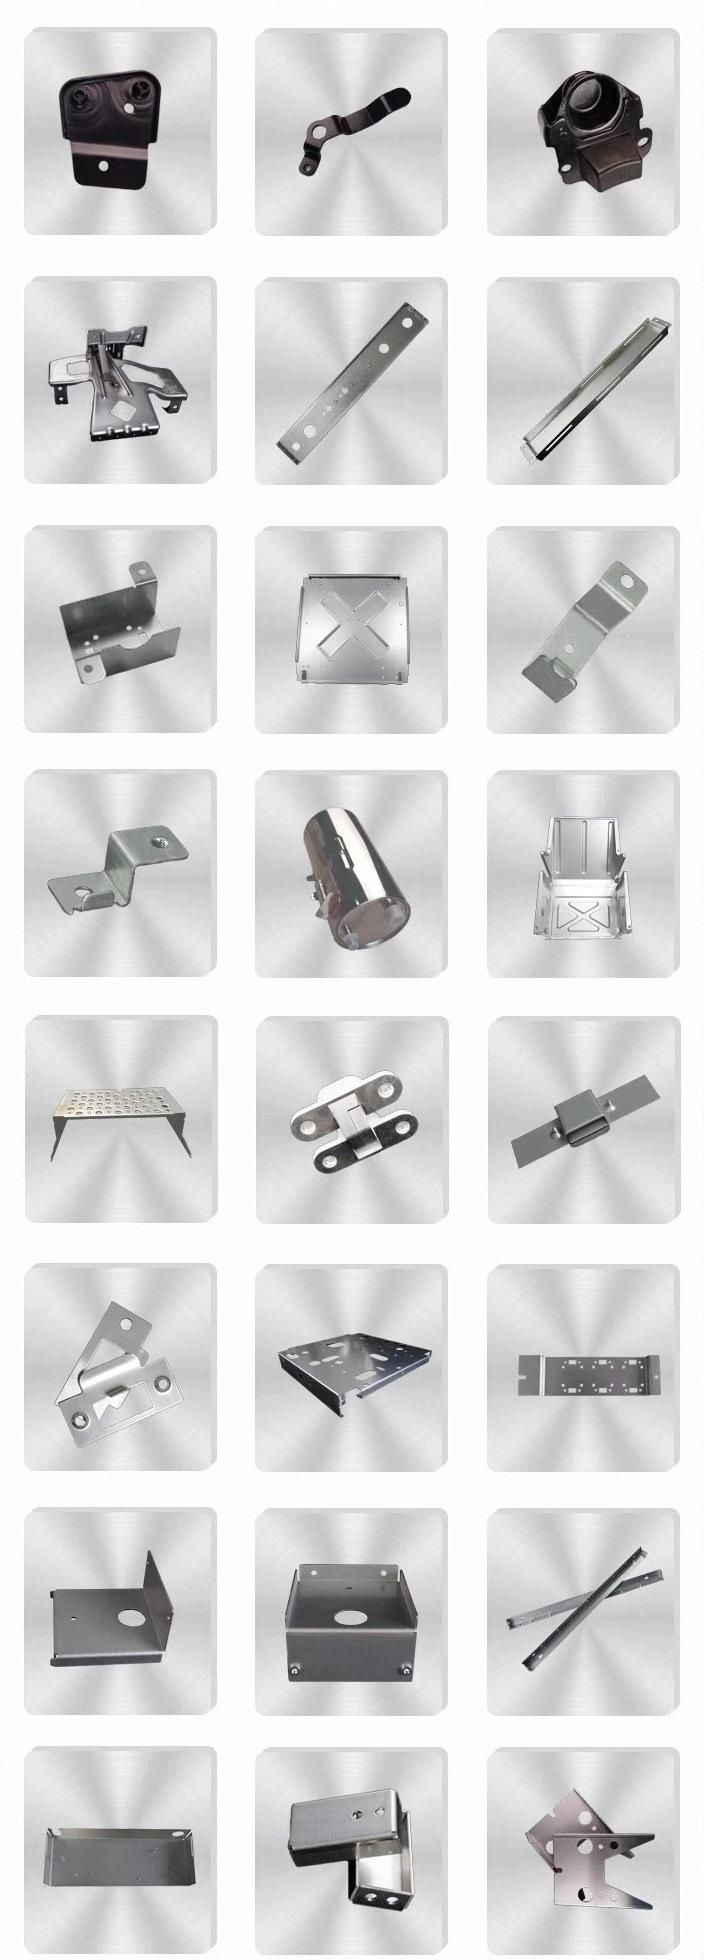 Stainless Steel Machining Parts Customized CNC Stainless Steel Parts